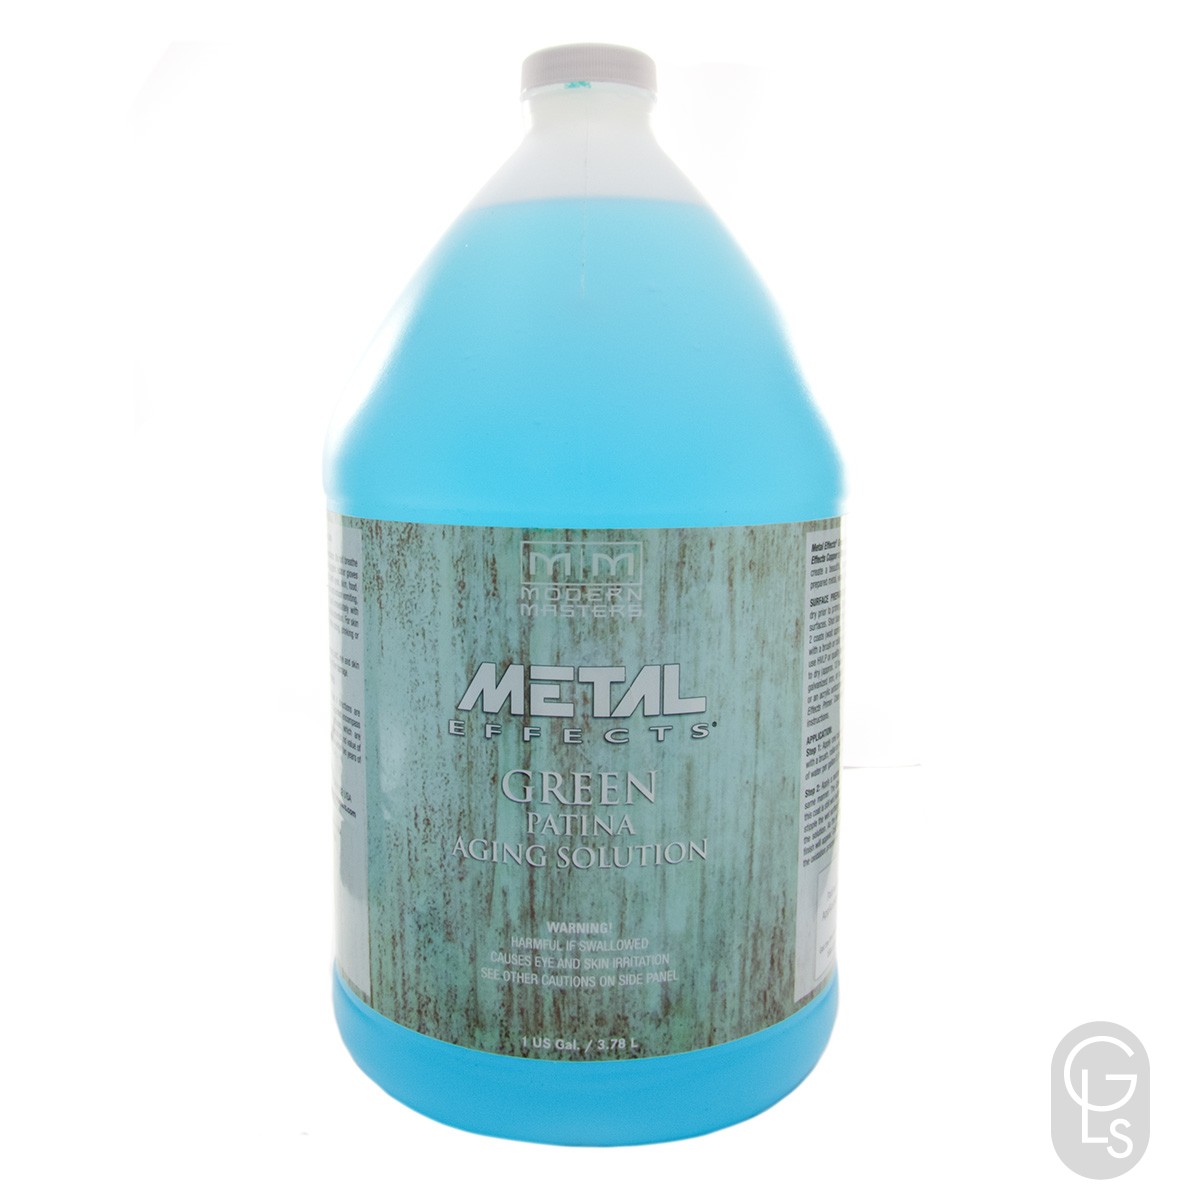 Metal Effects Ageing Solution Green Patina